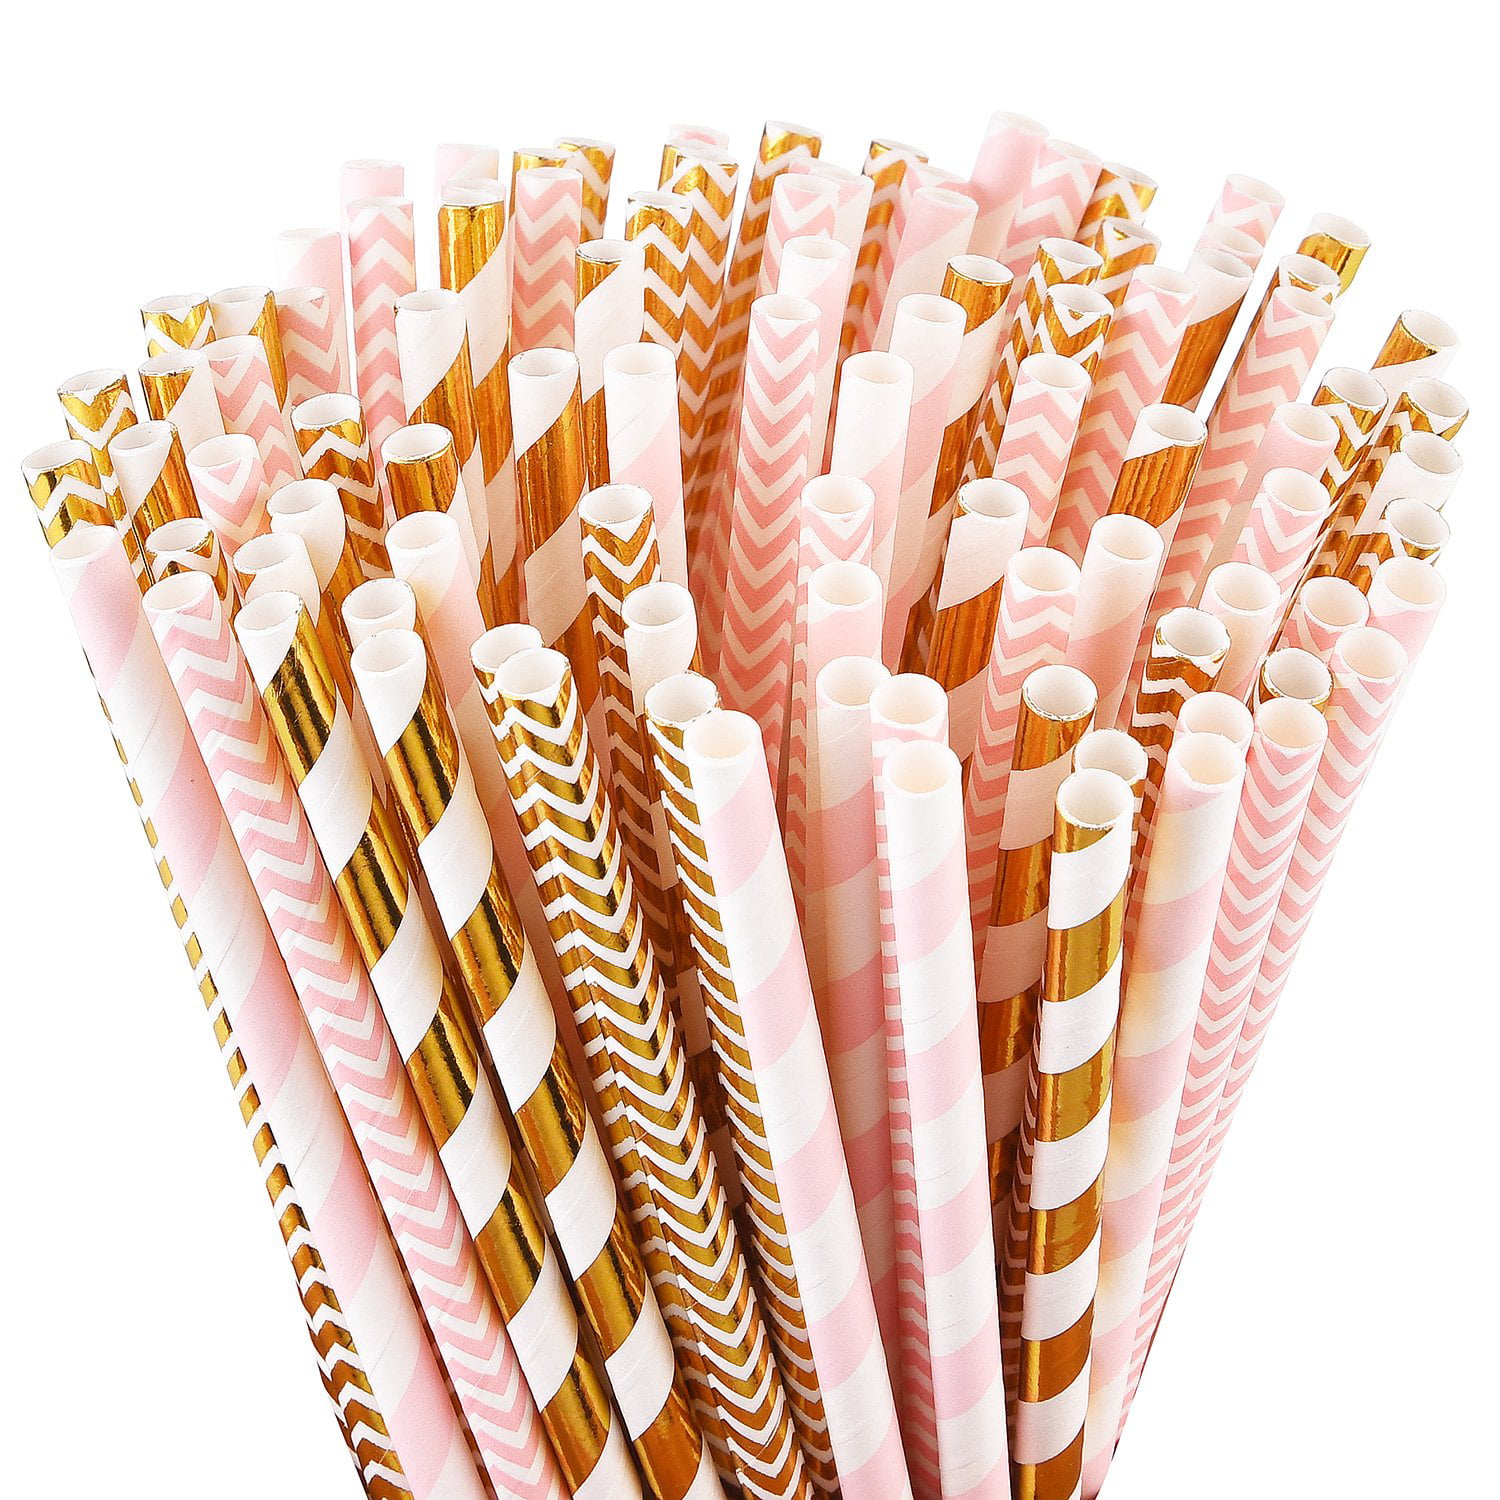 100 Black White Birch Straws for Kids Birthday/Farm Theme Party ALINK Biodegradable Cow Paper Straws Baby/Bridal Shower Decorations and Holiday 